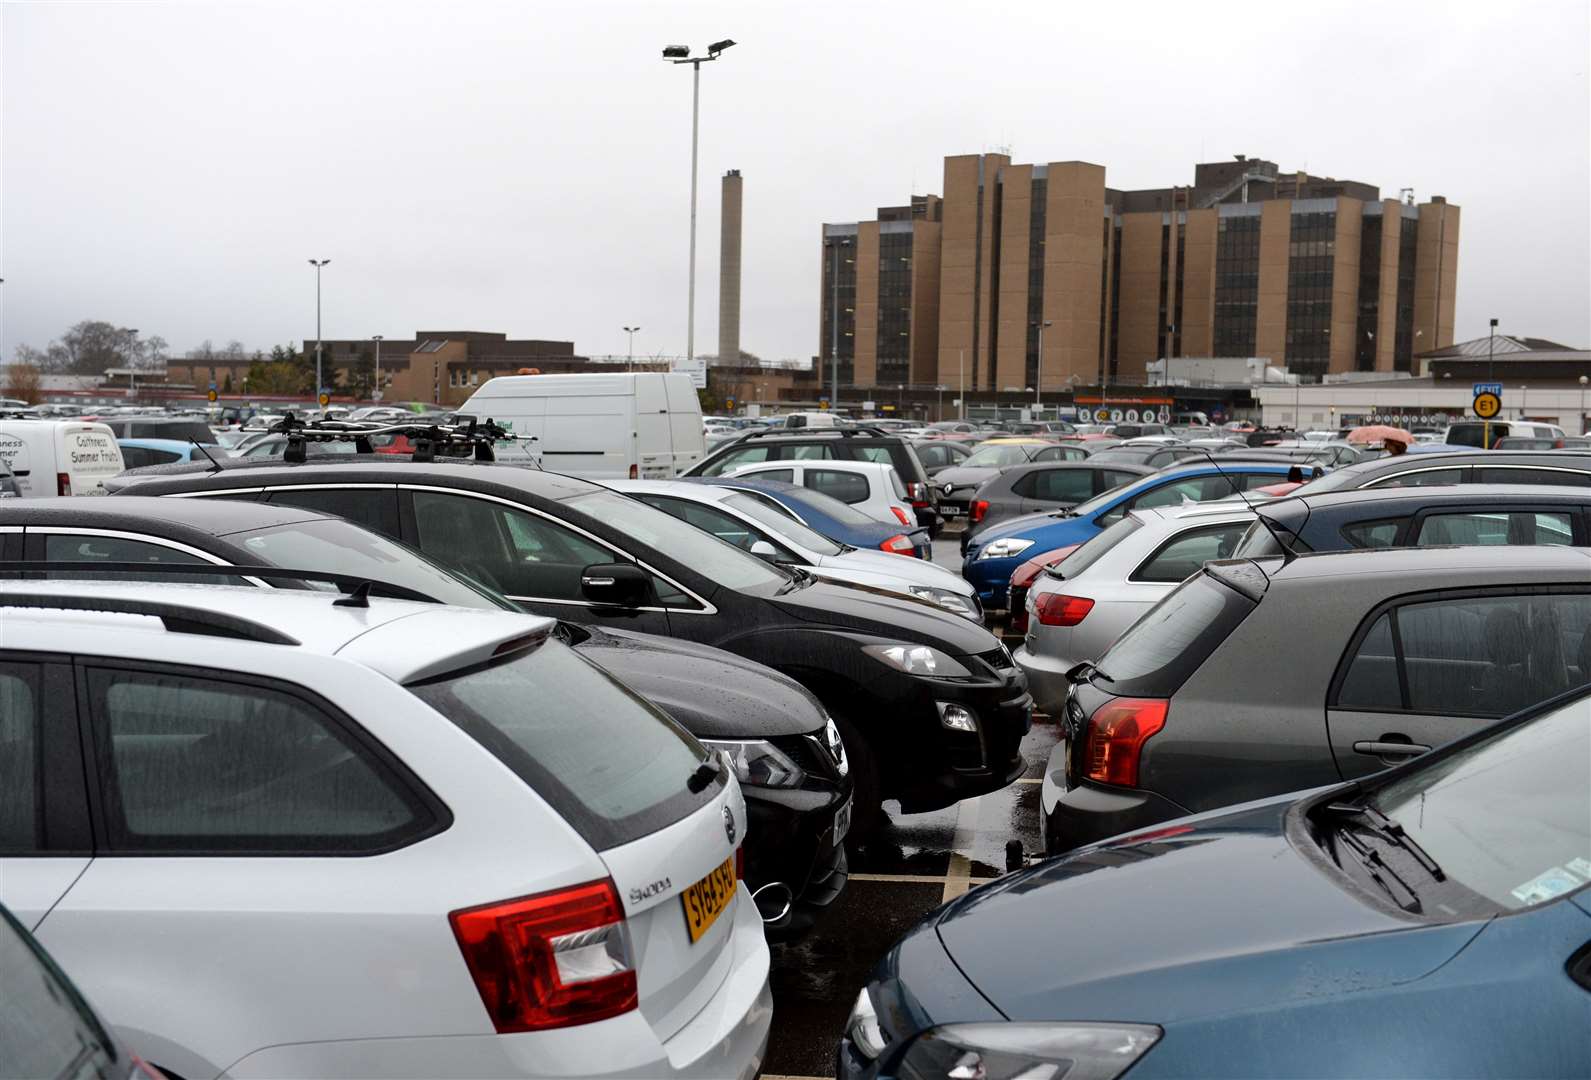 Sea of vehicles parked in various positions and places at Raigmore Hospital car park.